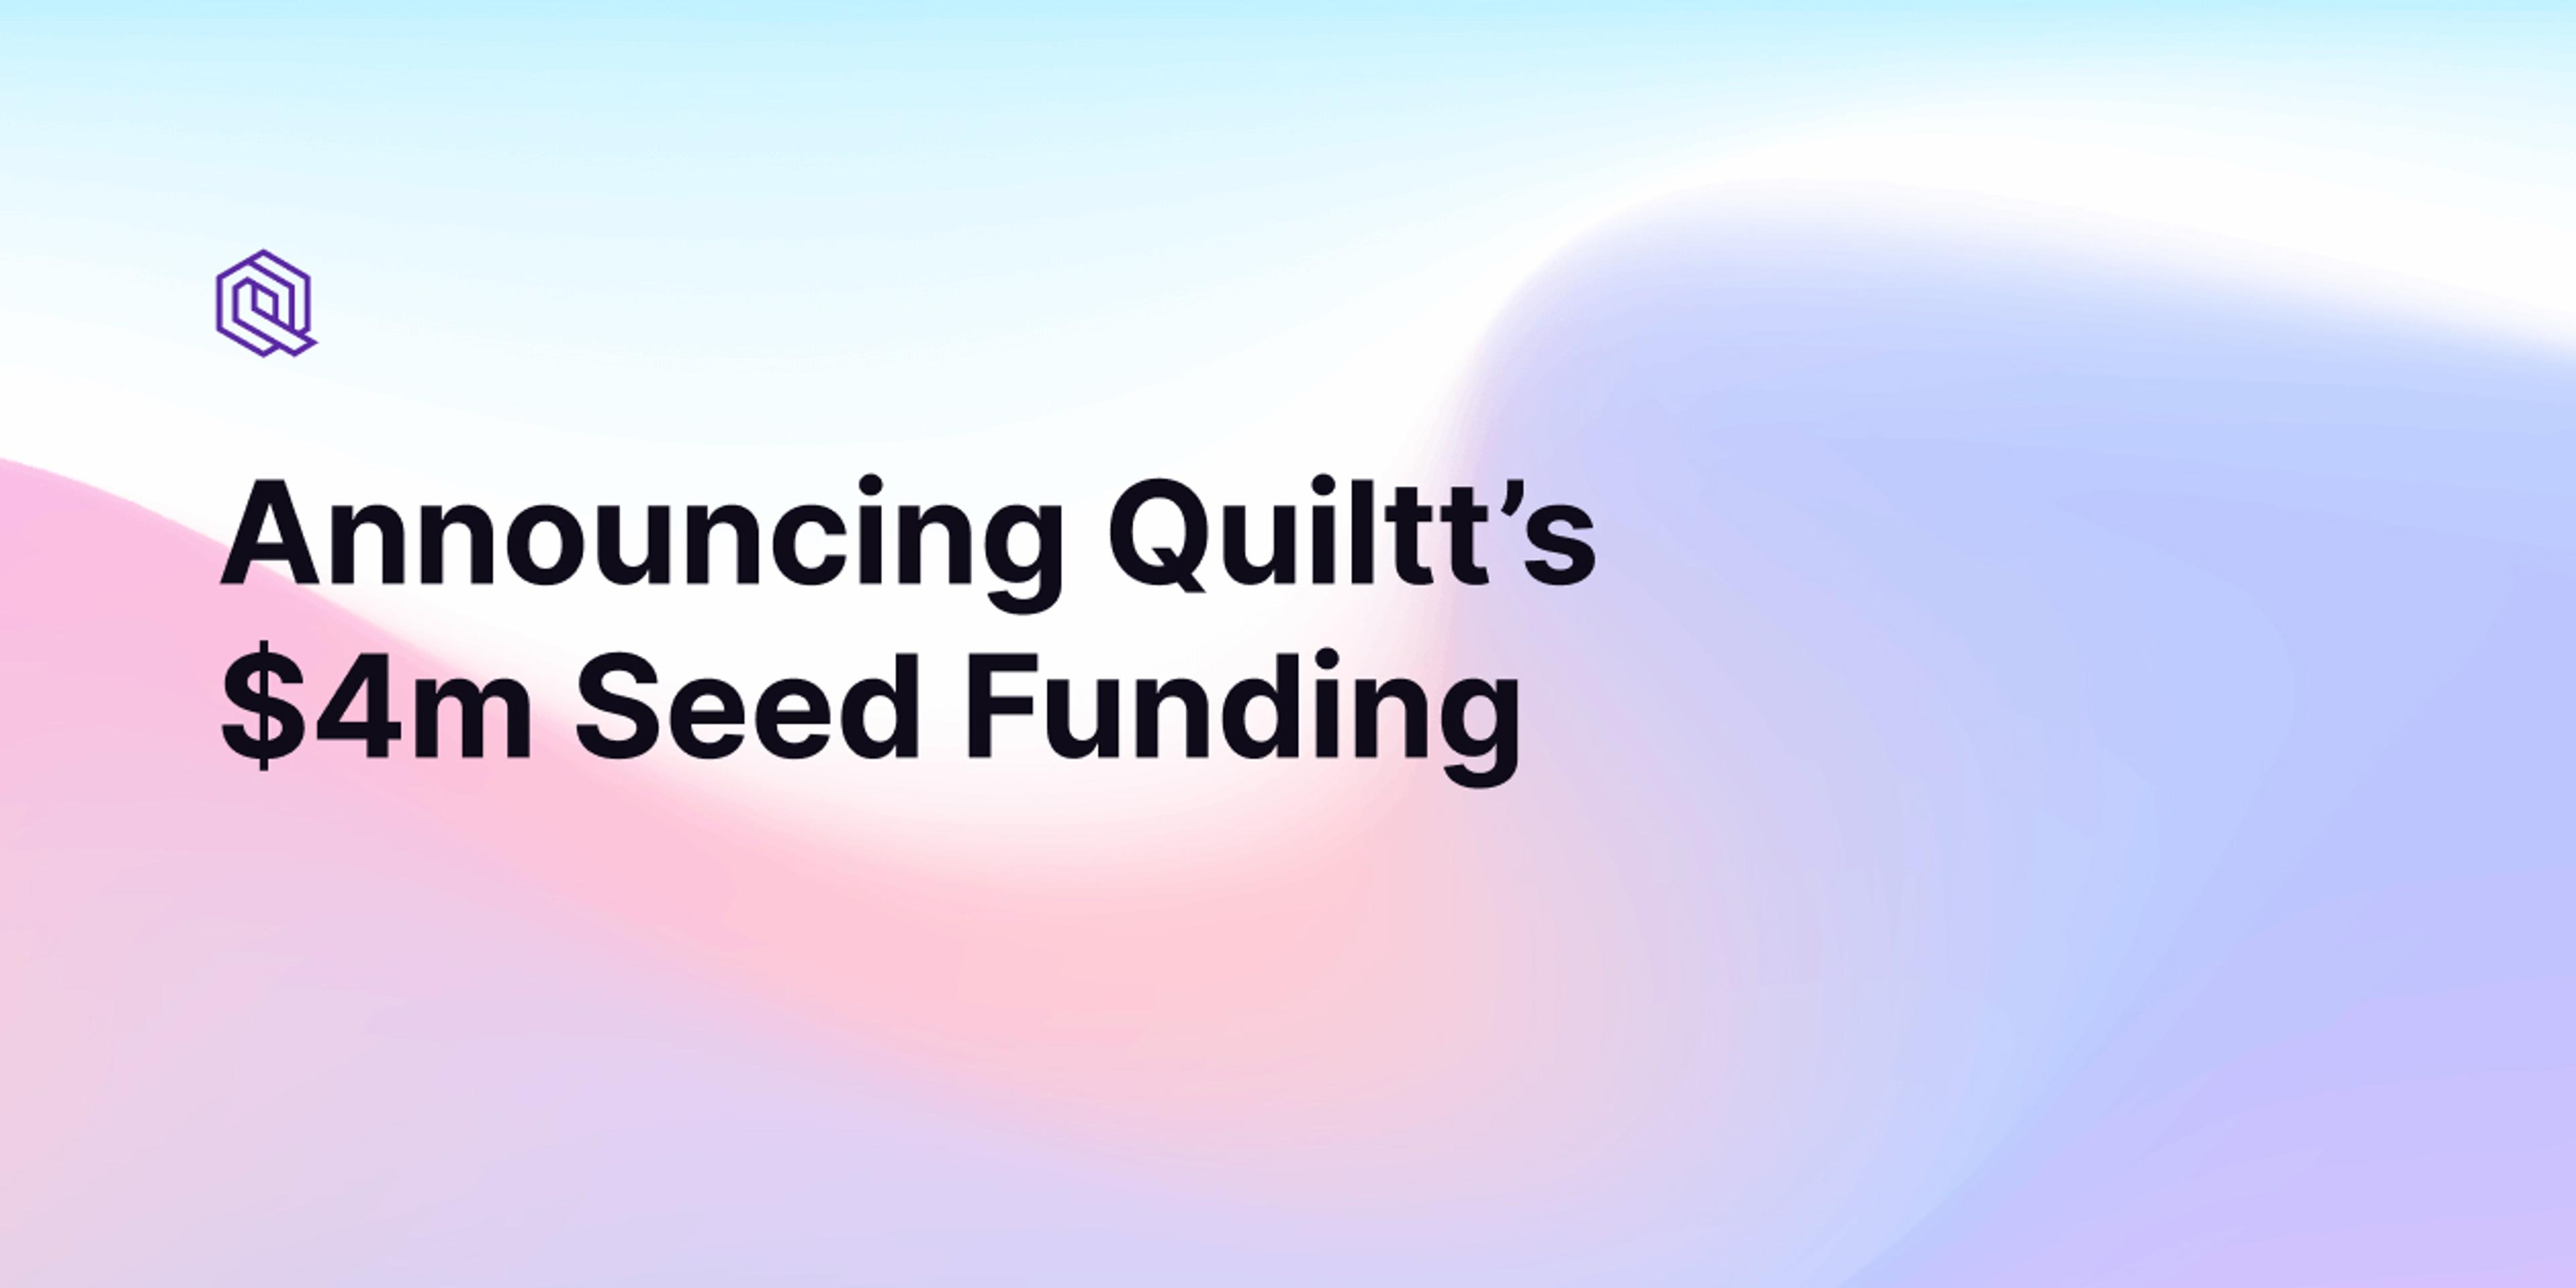 Announcing Quiltt’s $4m Seed Funding Post Image